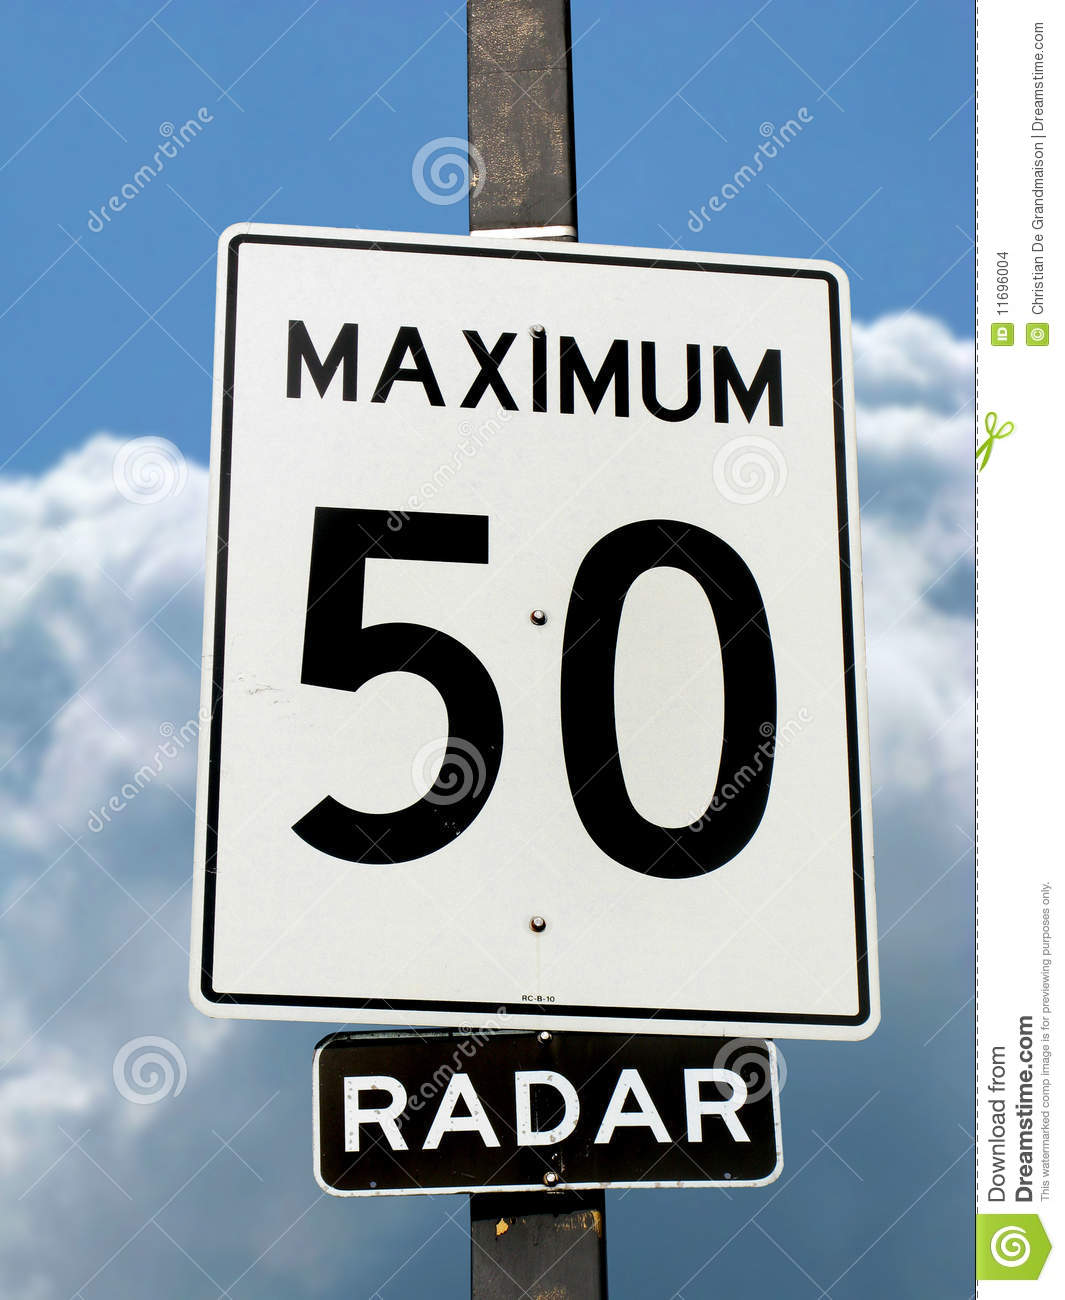 Speed Limit Sign Stock Images   Image  11696004